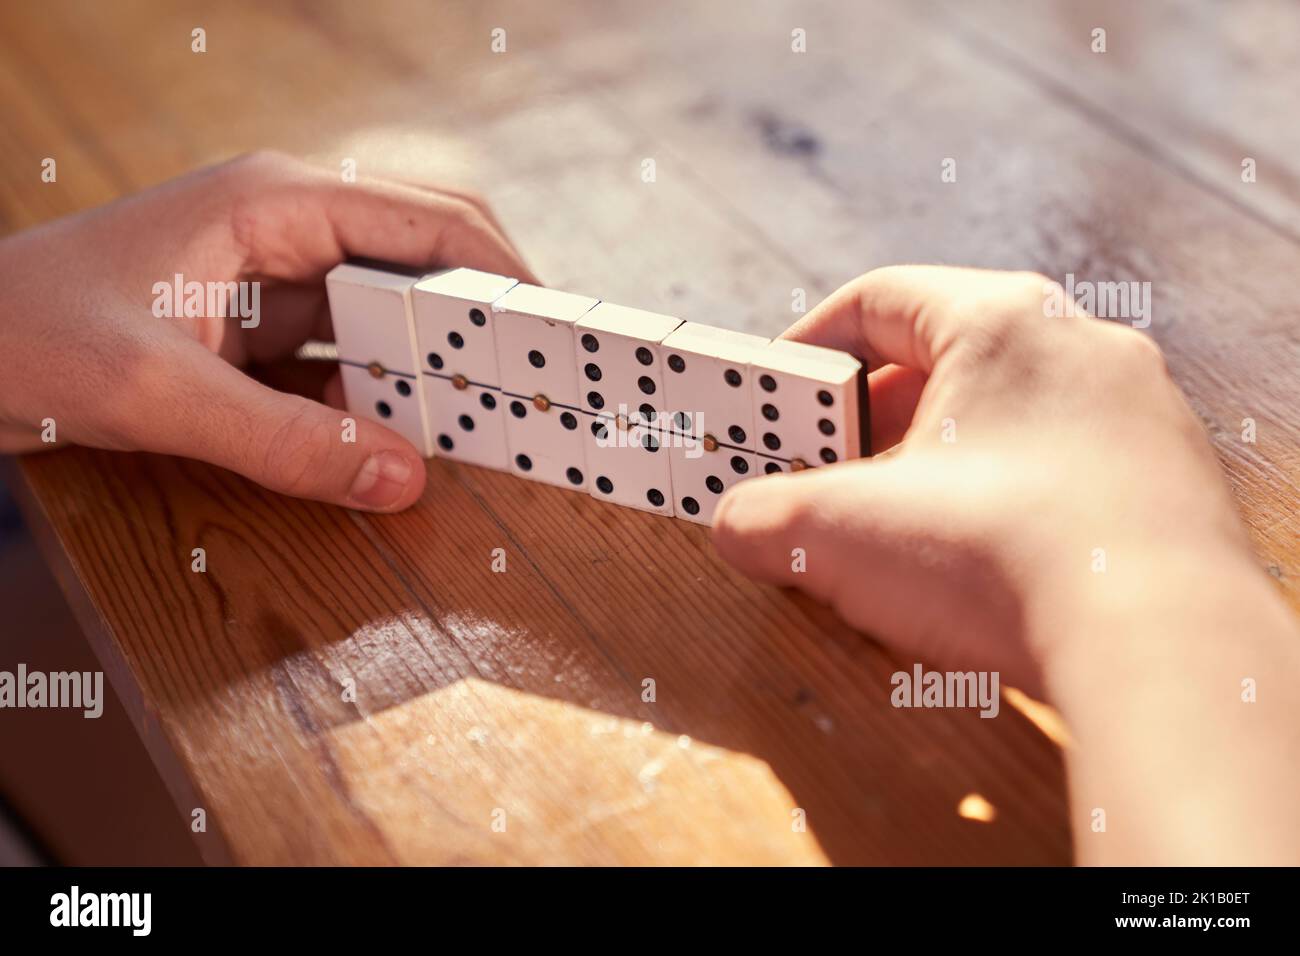 A family playing domino game in a wooden table. Stock Photo